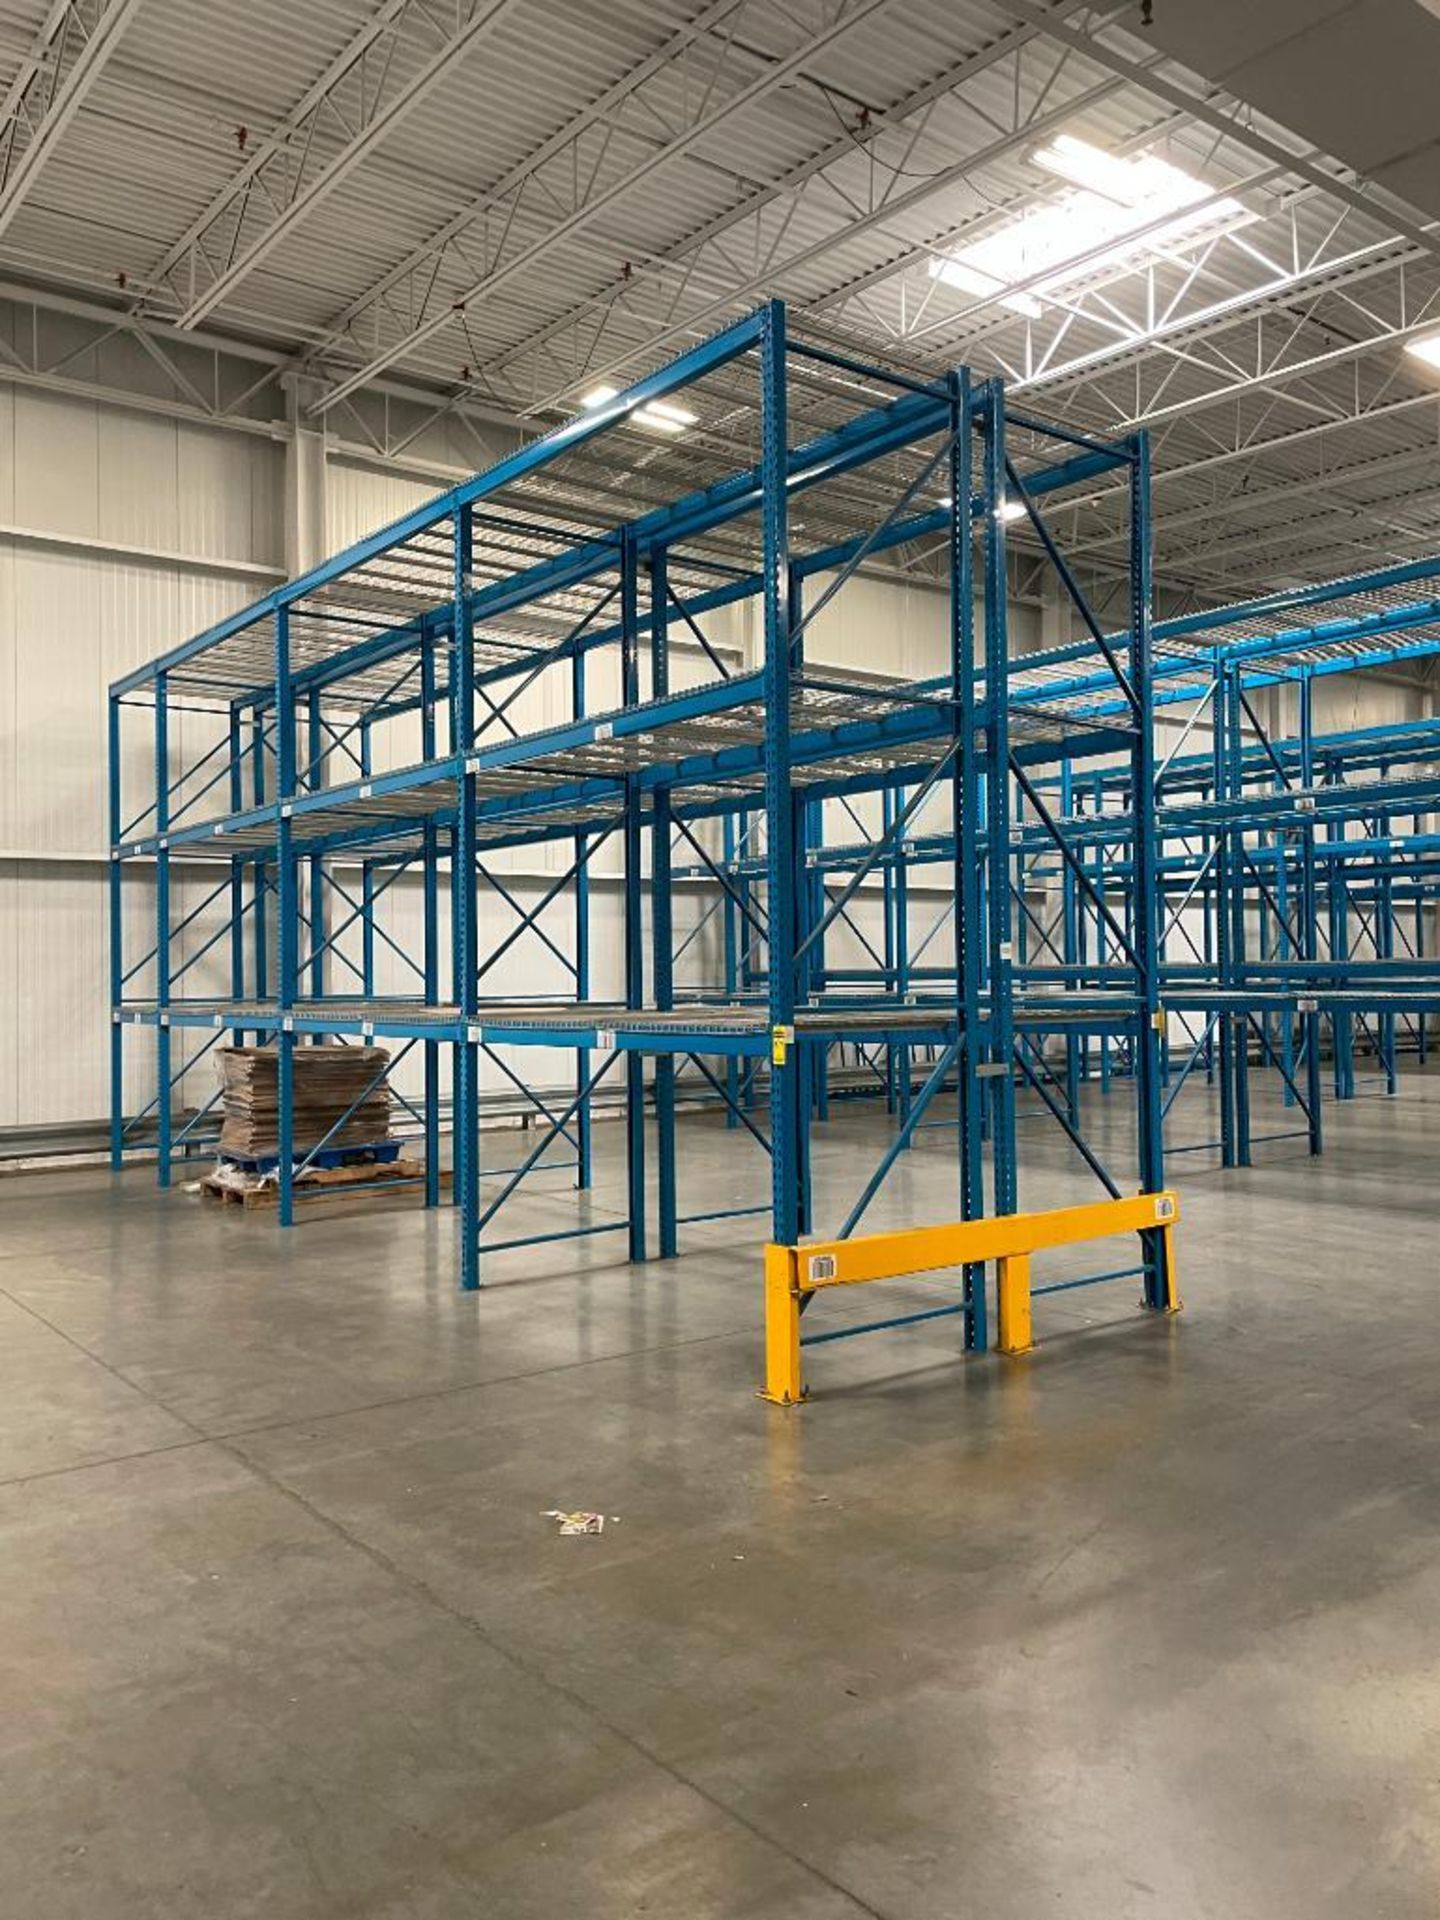 (55X) BAYS OF CARDINAL TEARDROP STYLE PALLET RACKING, (72) 15 FT. X 48 IN. UPRIGHTS, (330) 108 IN. X